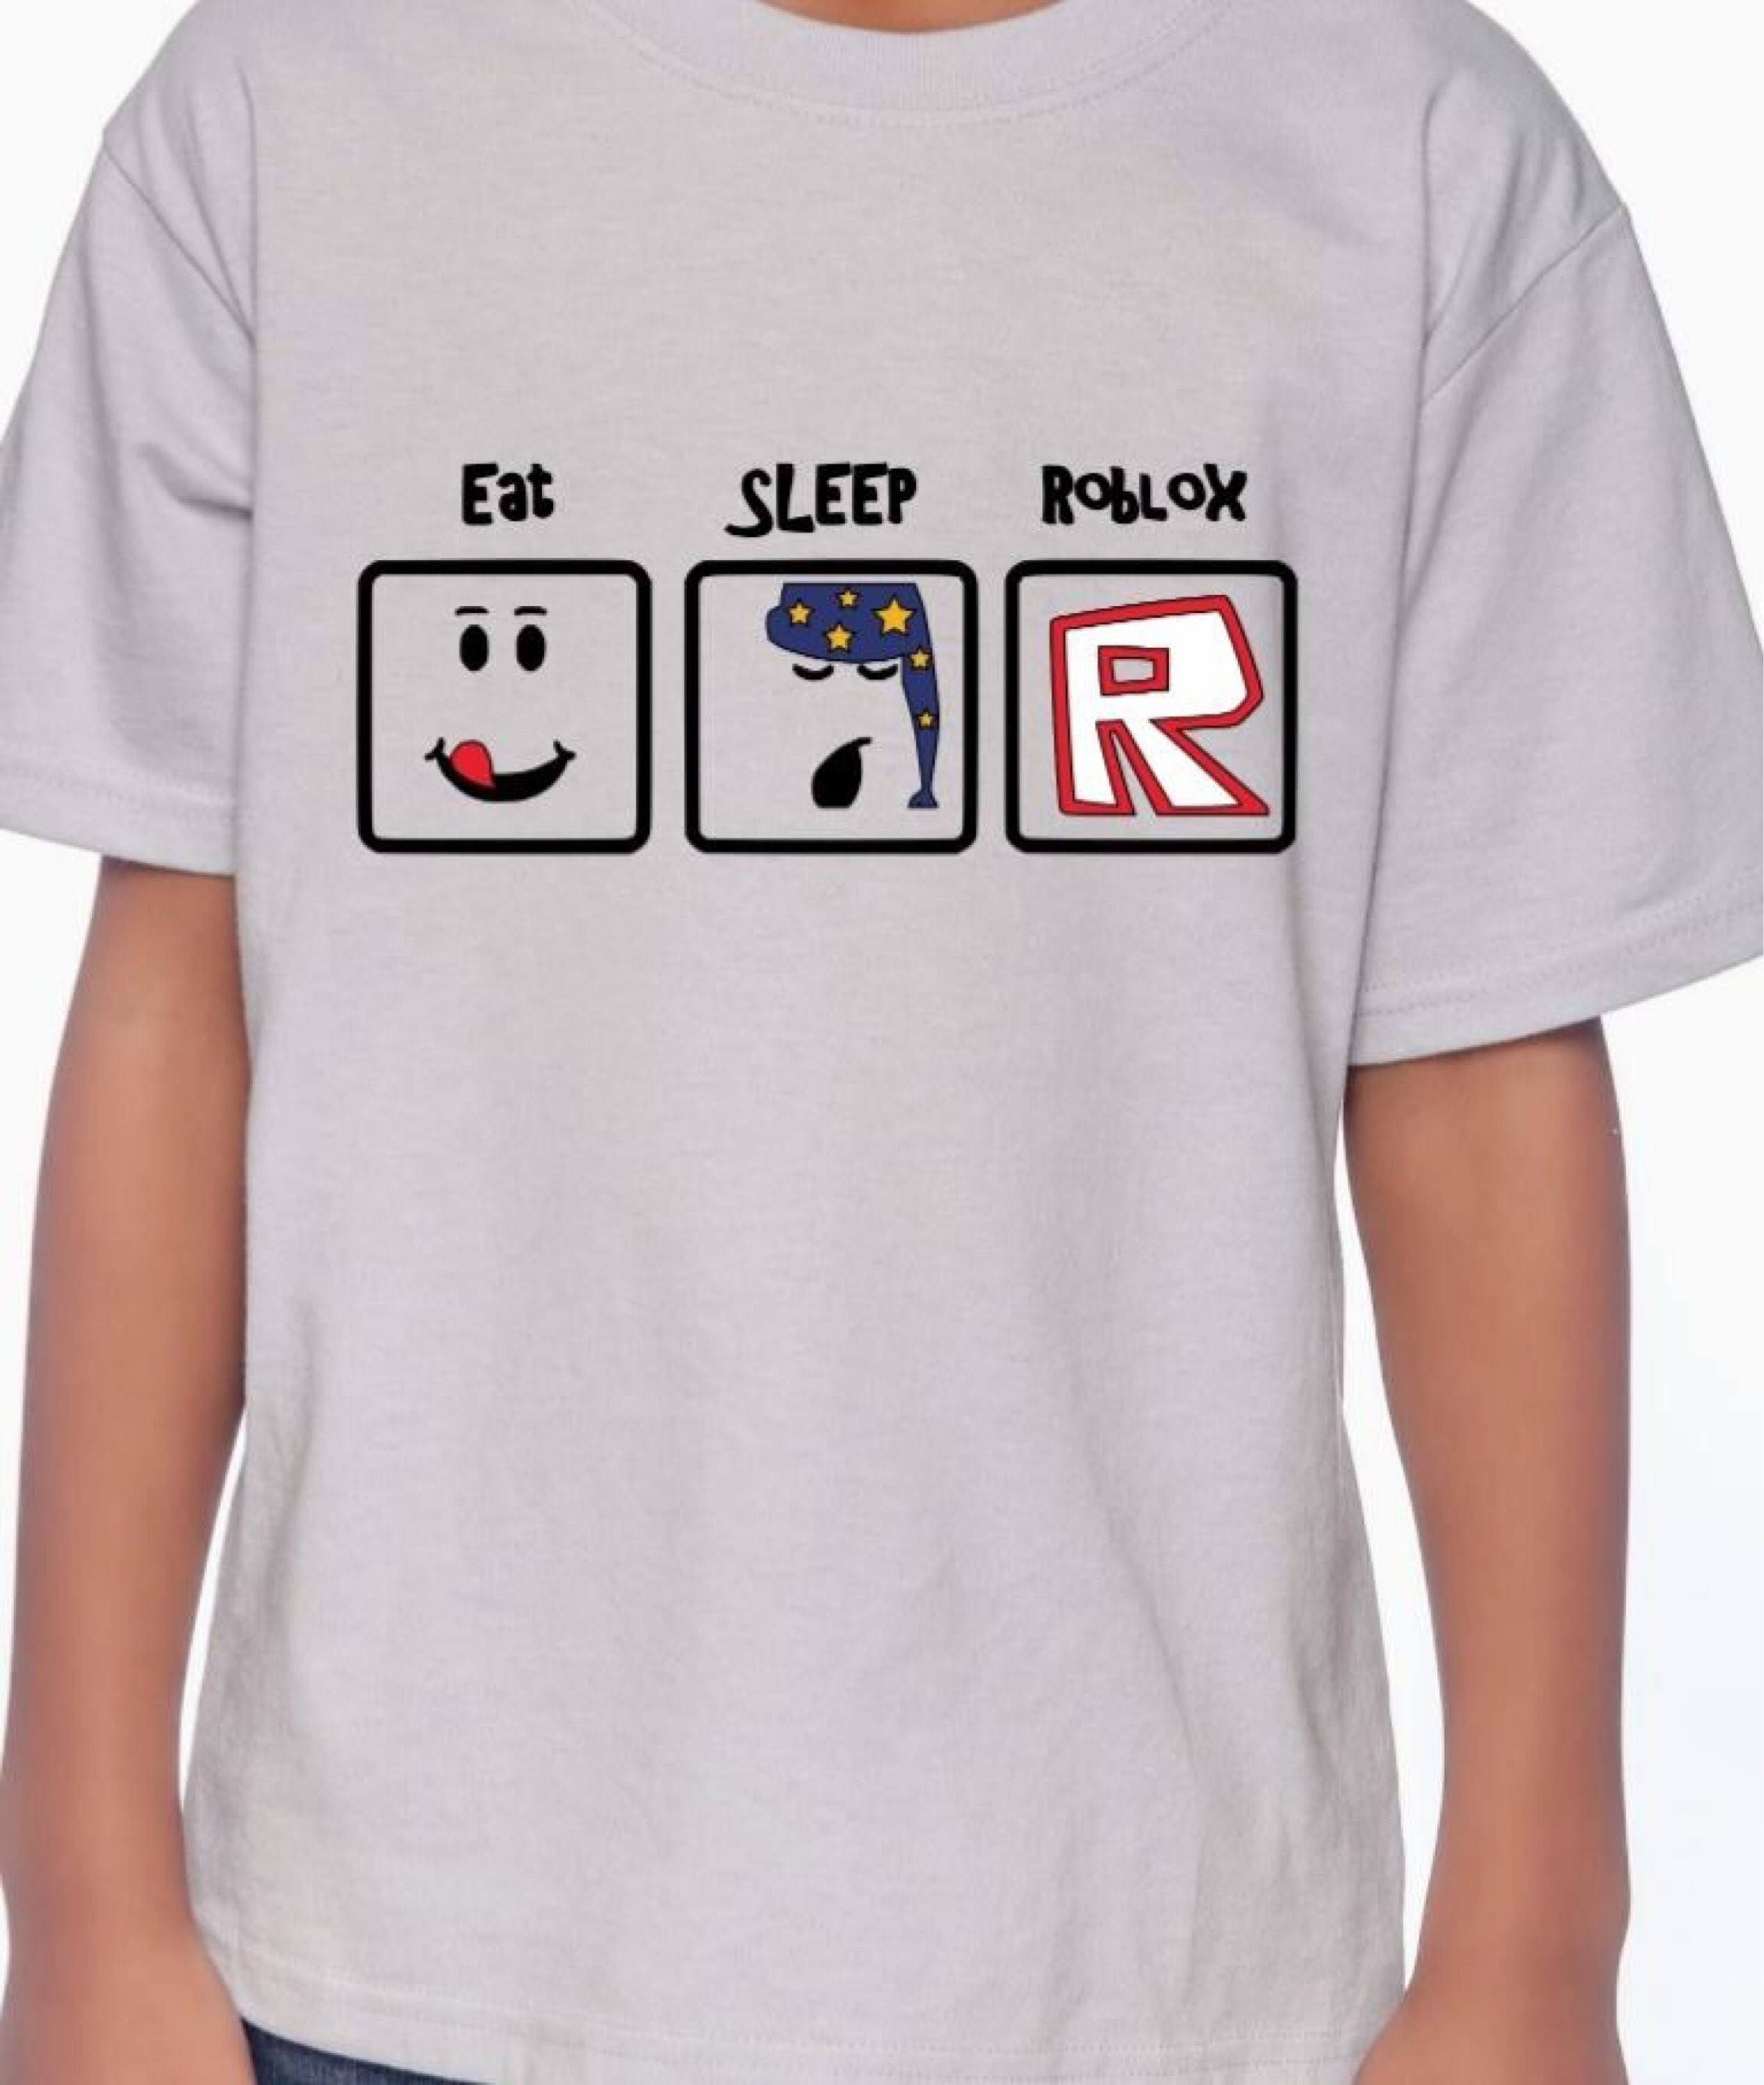 Fox Pants Code For Roblox Tomwhite2010 Com - how to make roblox shirts 2019 coolmine community school